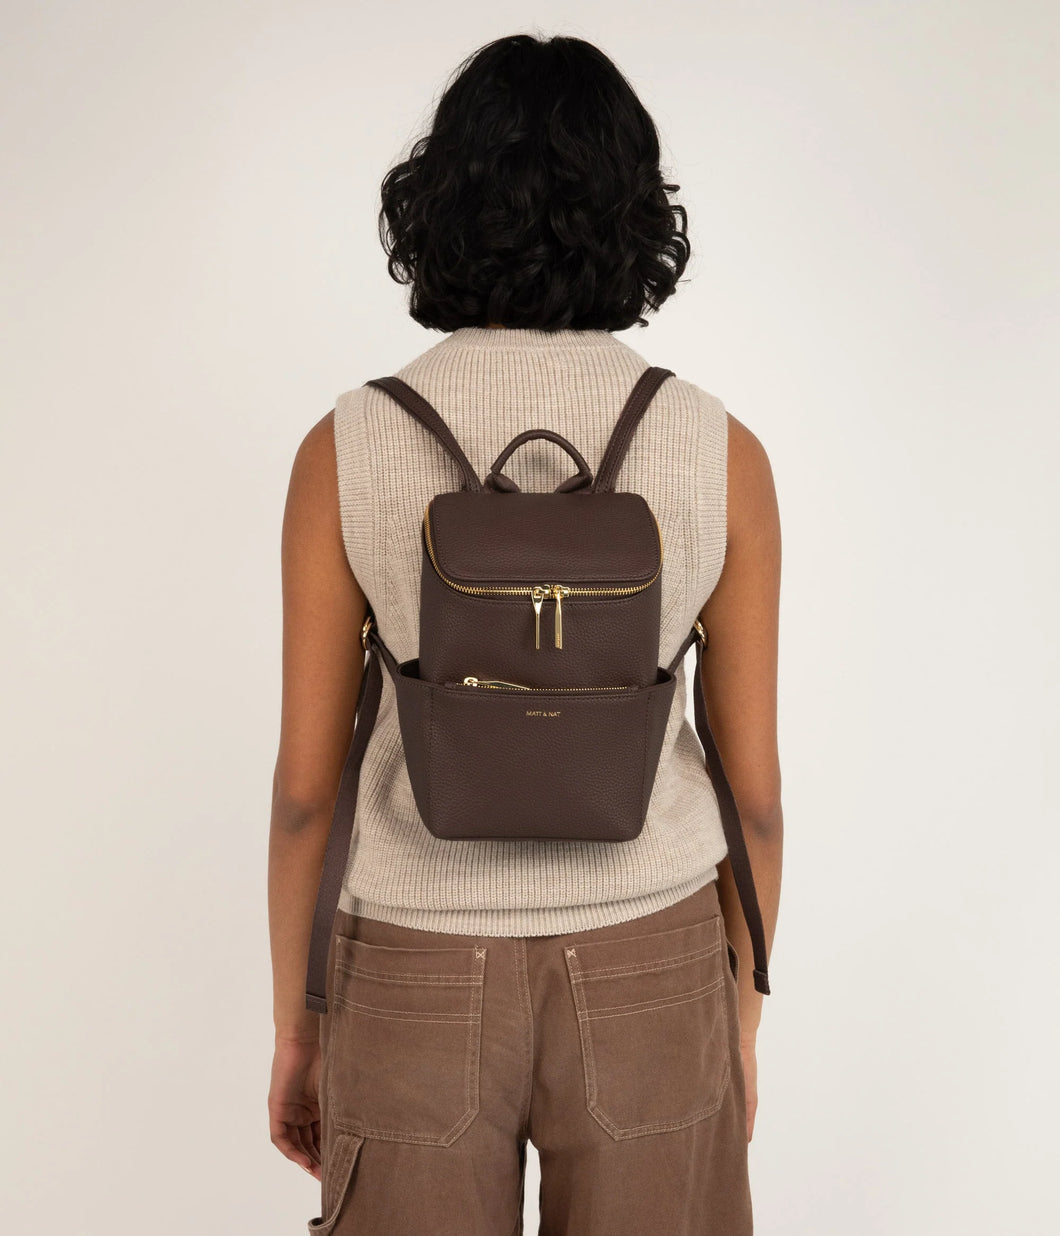 BRAVE SMALL PURITY BACKPACK IN TRUFFLE